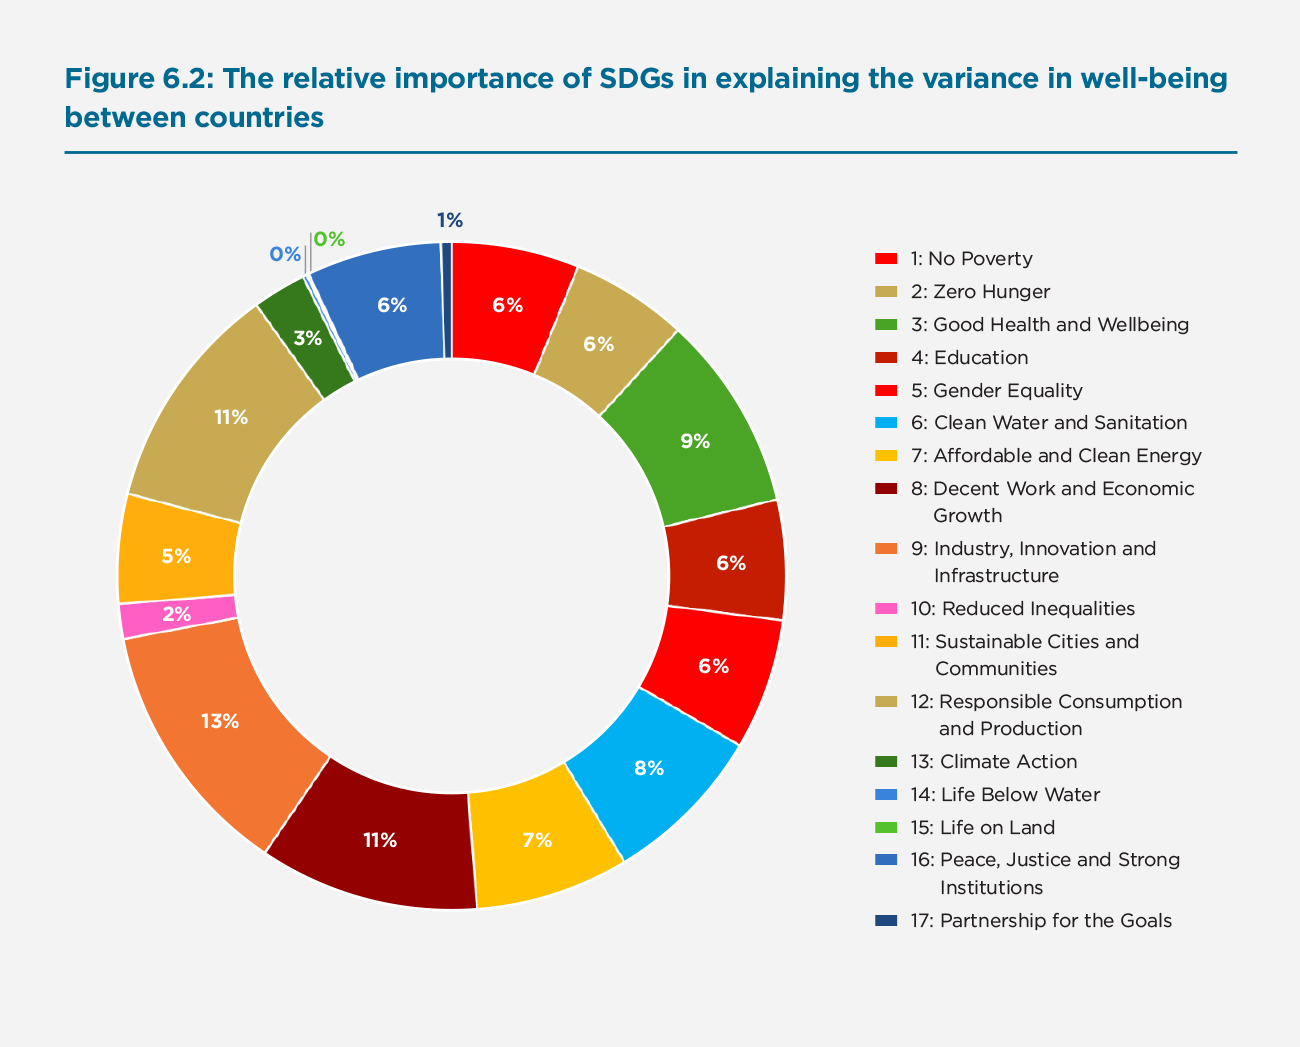 Figure 6.2: The relative importance of SDGs in explaining the variance in well-being between countries